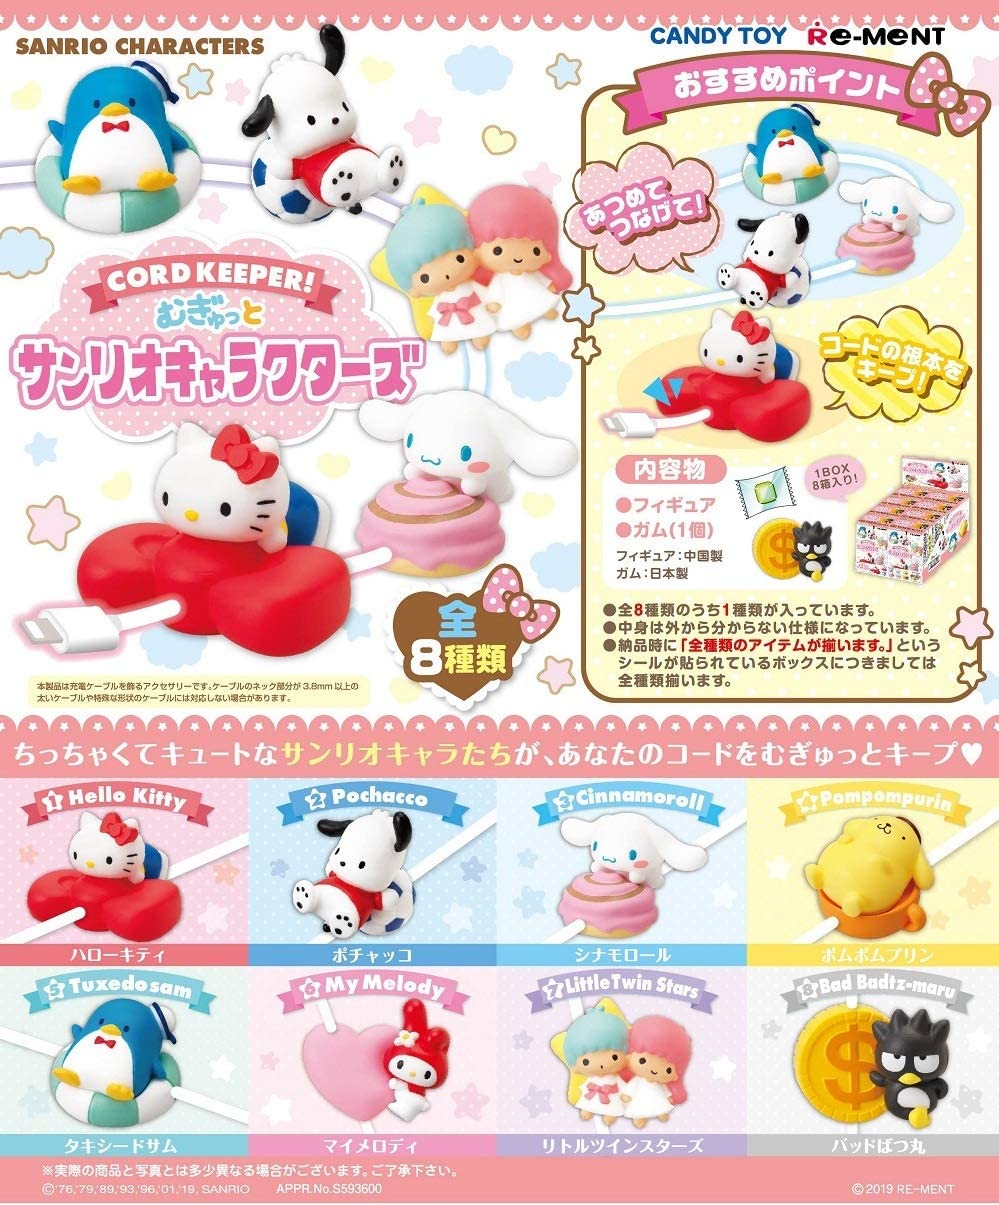 Re-ment Sanrio Character Cord Keeper